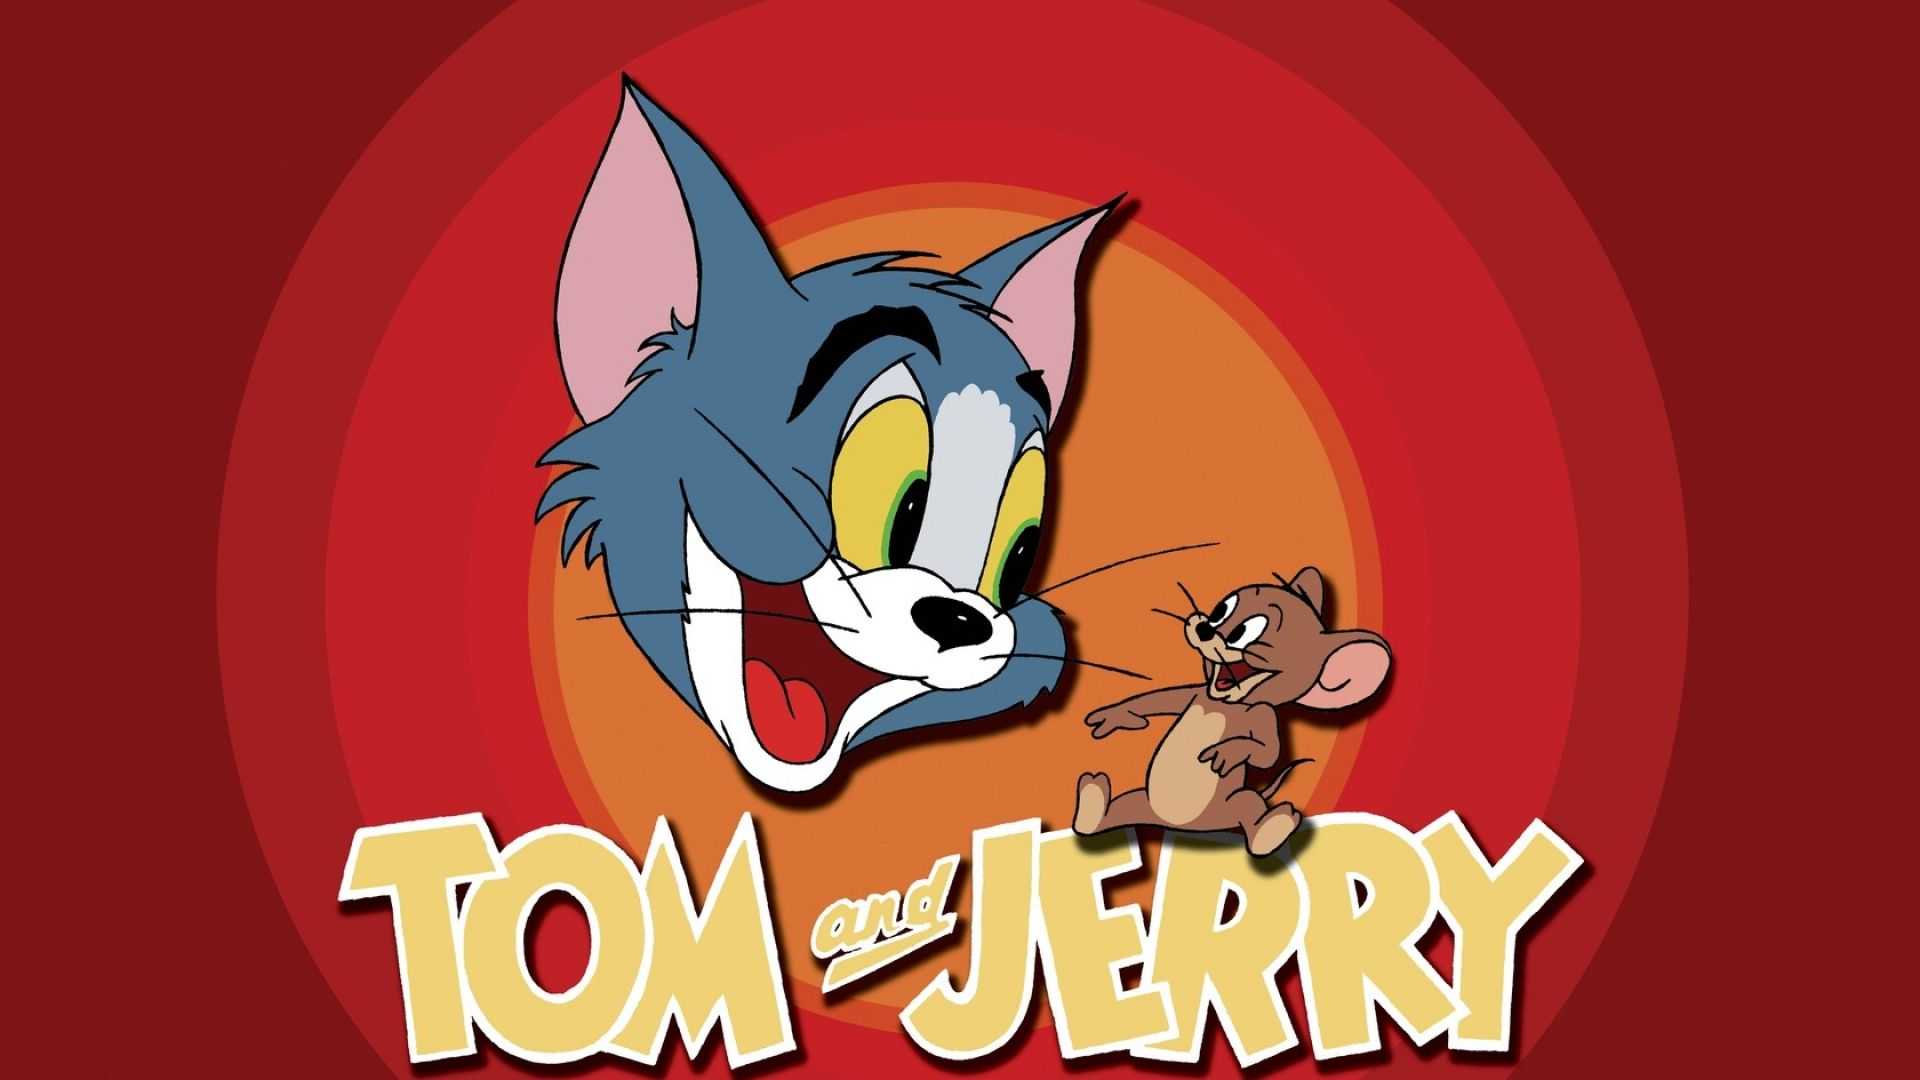 Chromebook Tom and Jerry Wallpaper 1